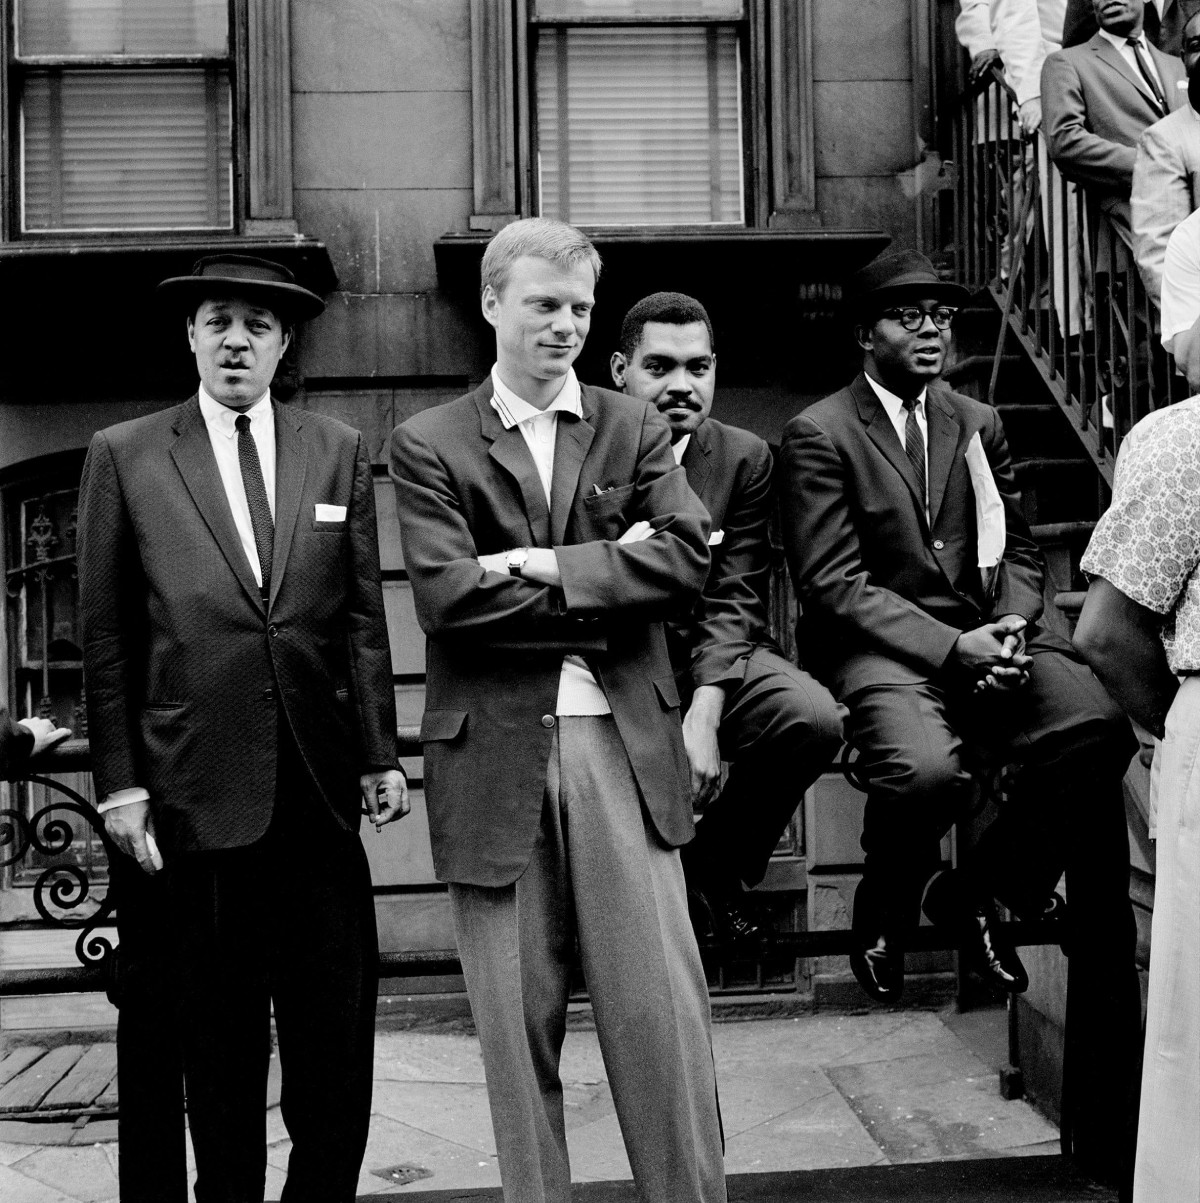 "A Great Day in Harlem", from the Art Kane Archives